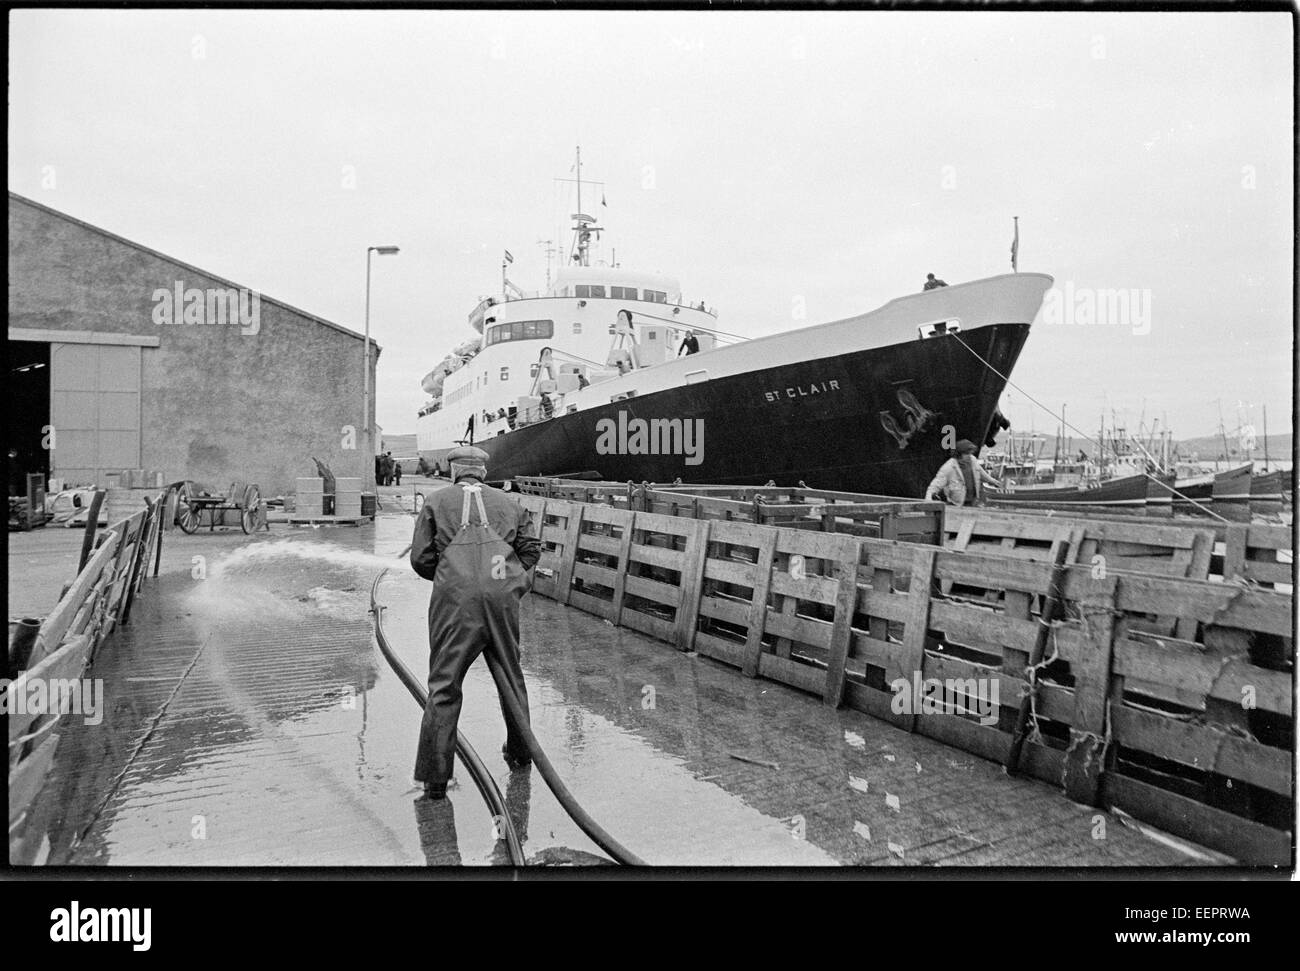 Livestock pens being cleaned in Lerwick harbour, with St Claire about to depart for Aberdeen. Stock Photo